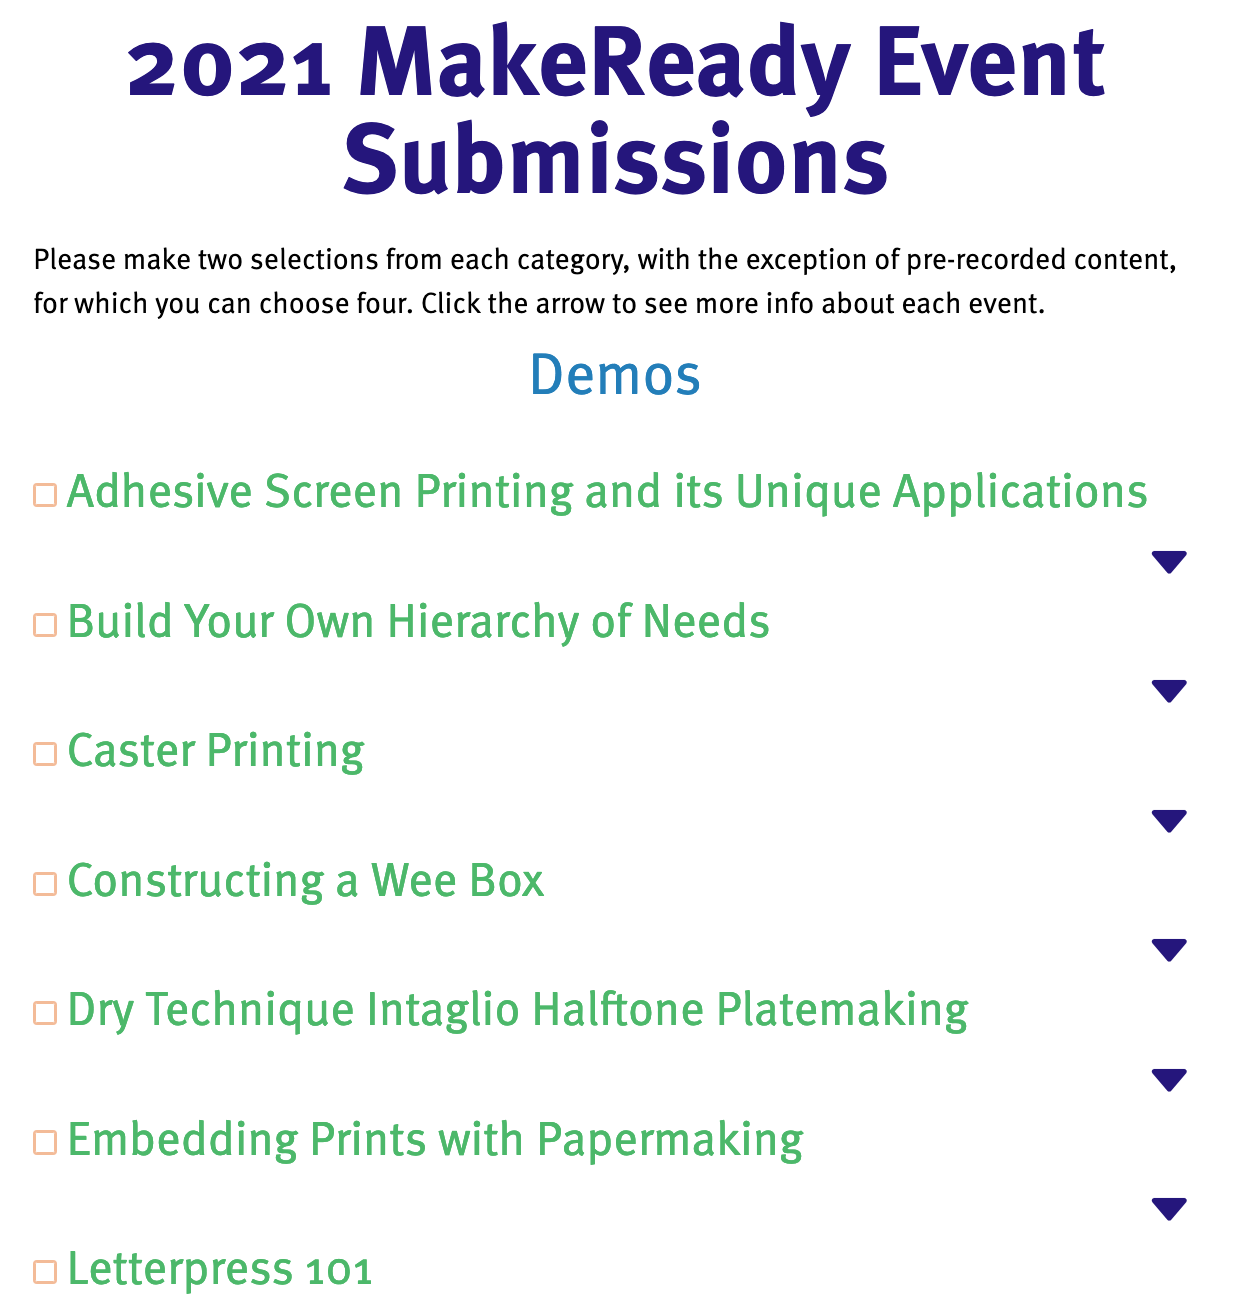 MakeReady Event Submissions